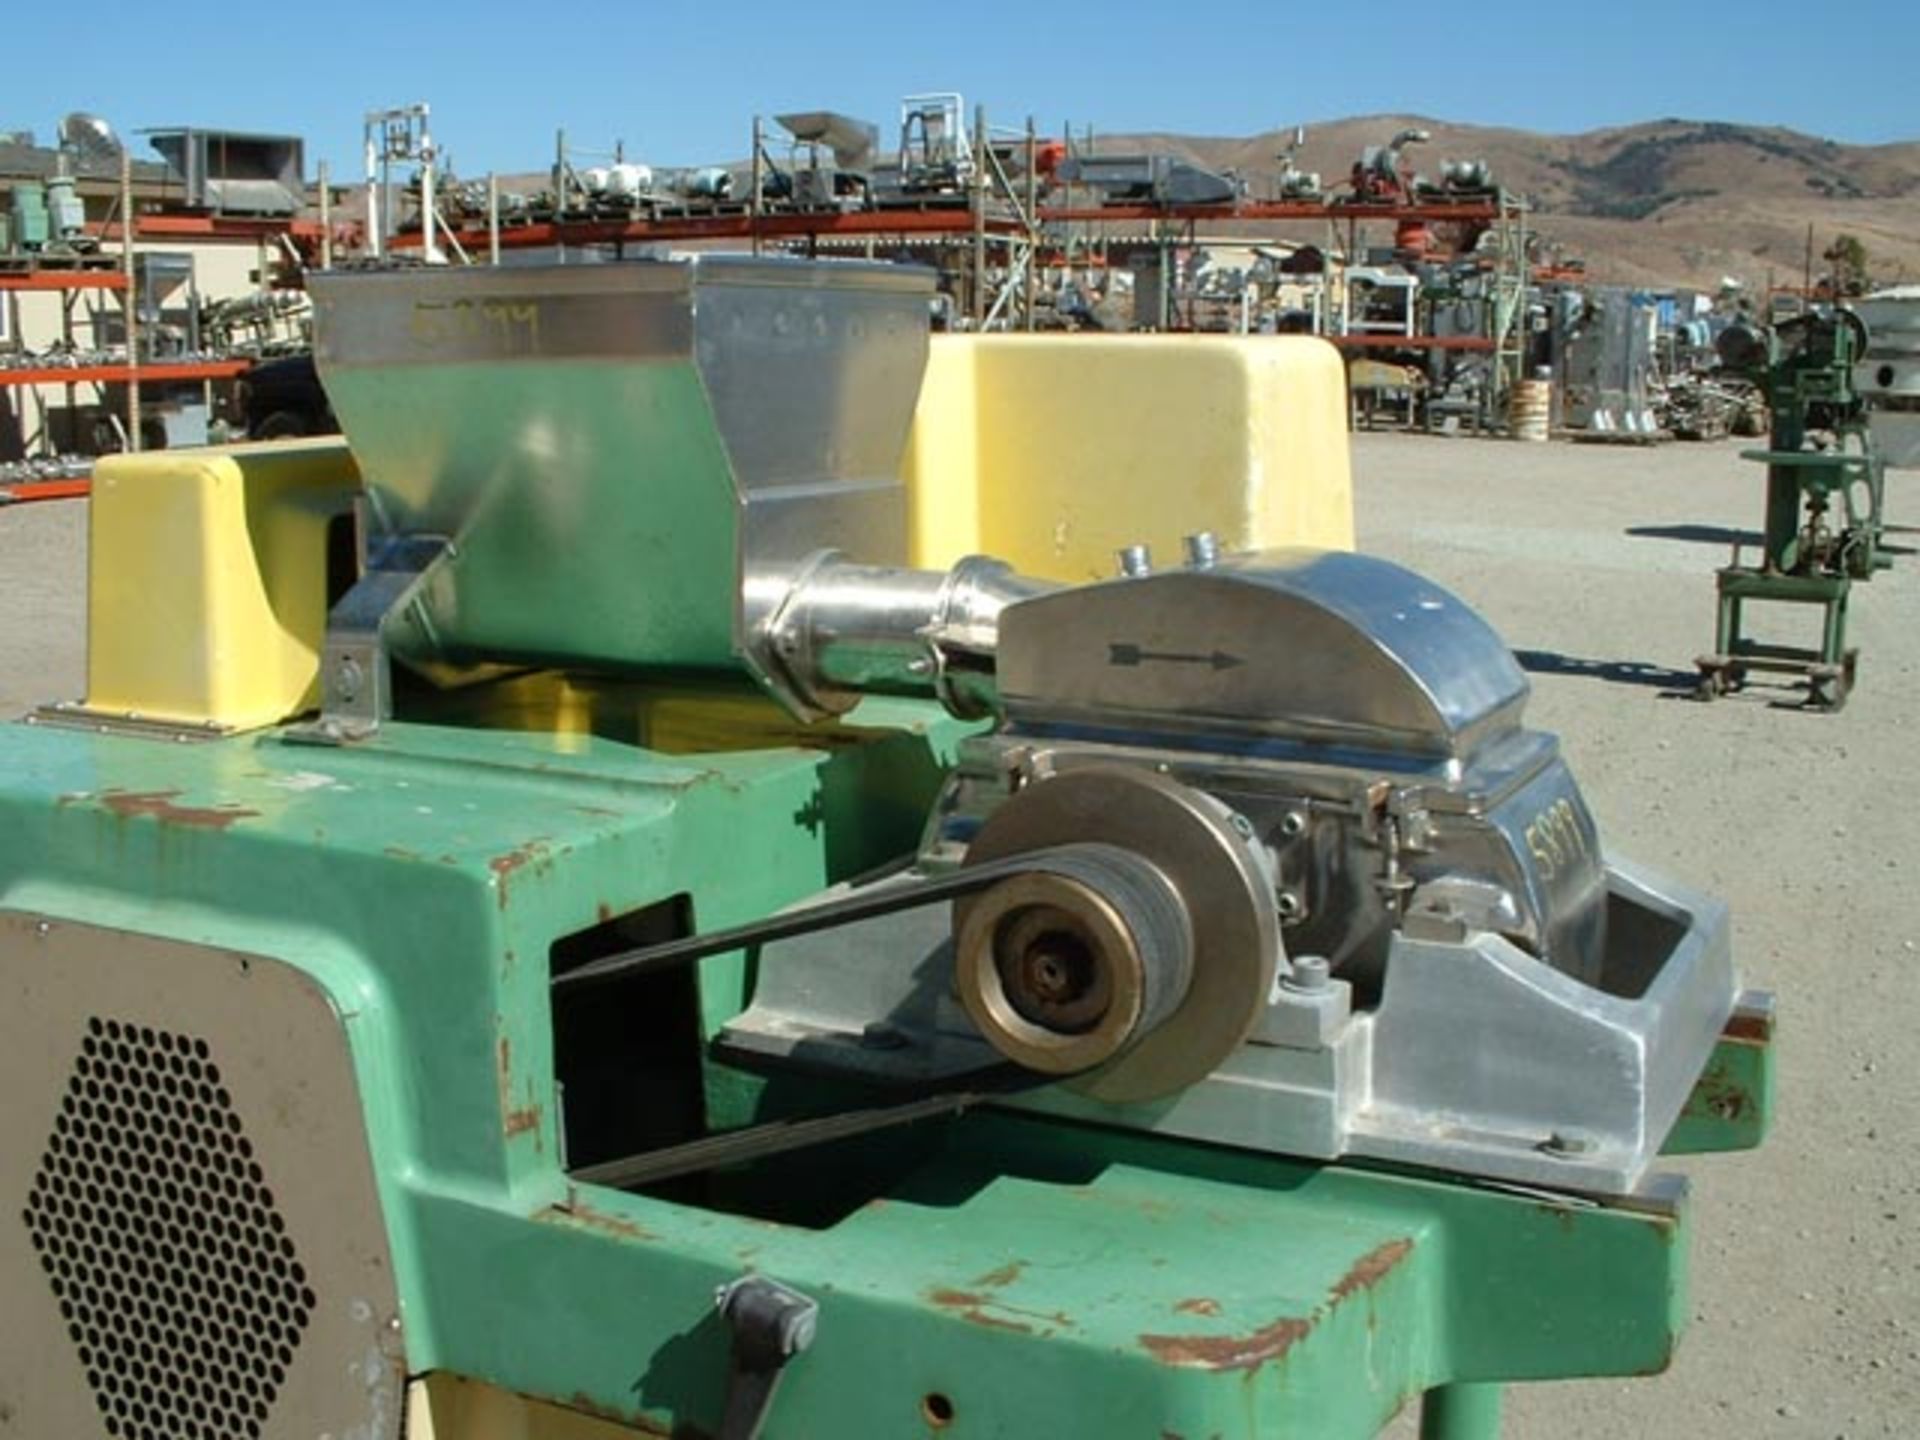 (Located in Morgan Hill, CA) Fitzpatrick Hammer Mill, Model DAS06, SN 9223, Auger Feed, S/S Product